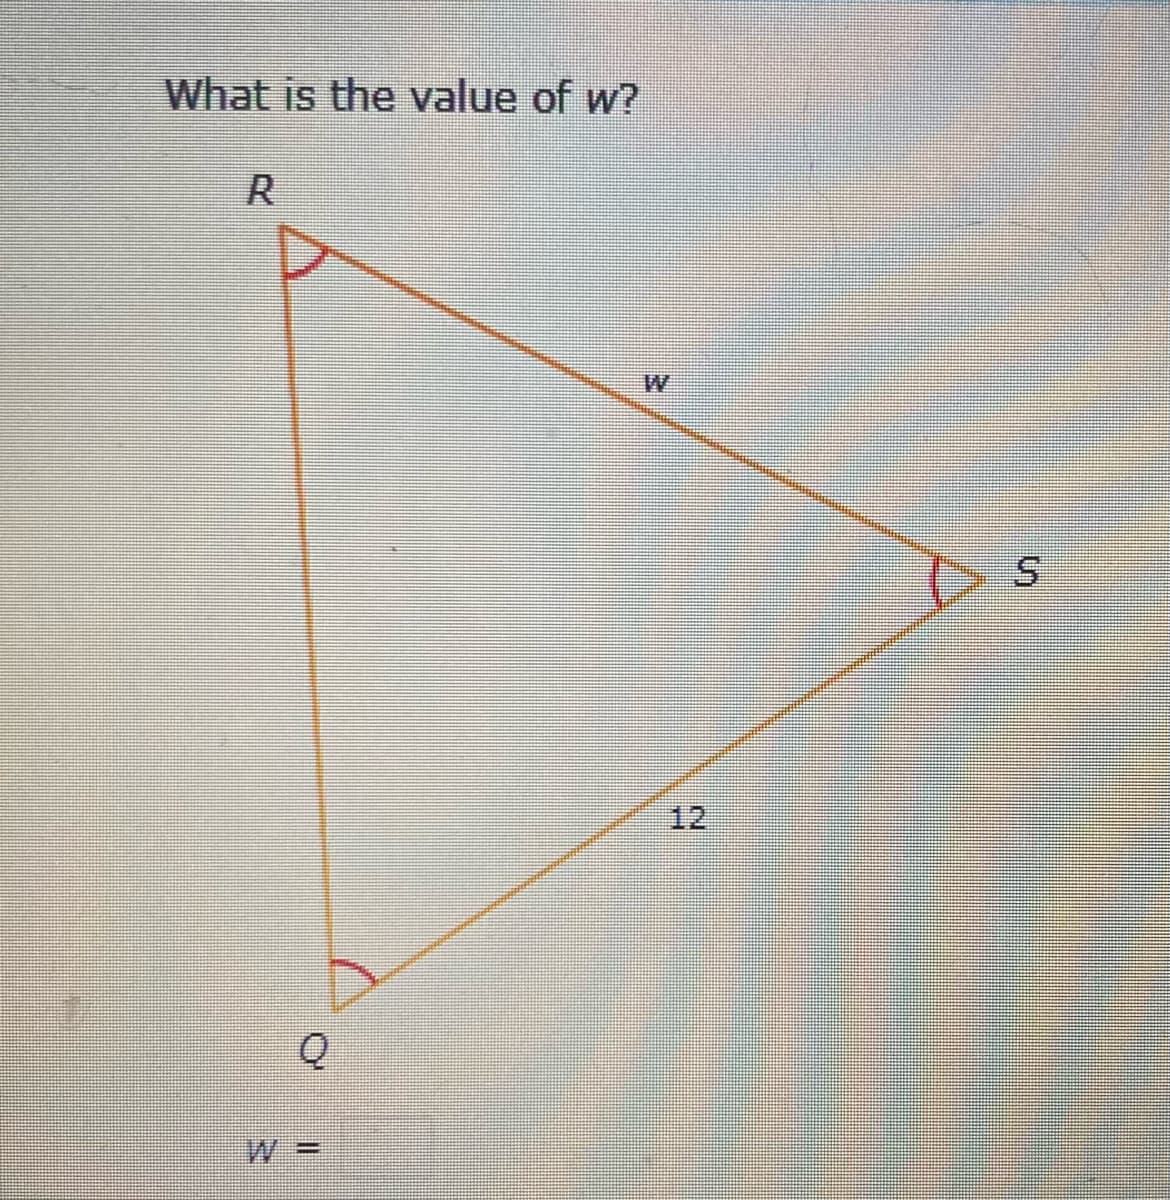 What is the value of w?
R
12
Q
